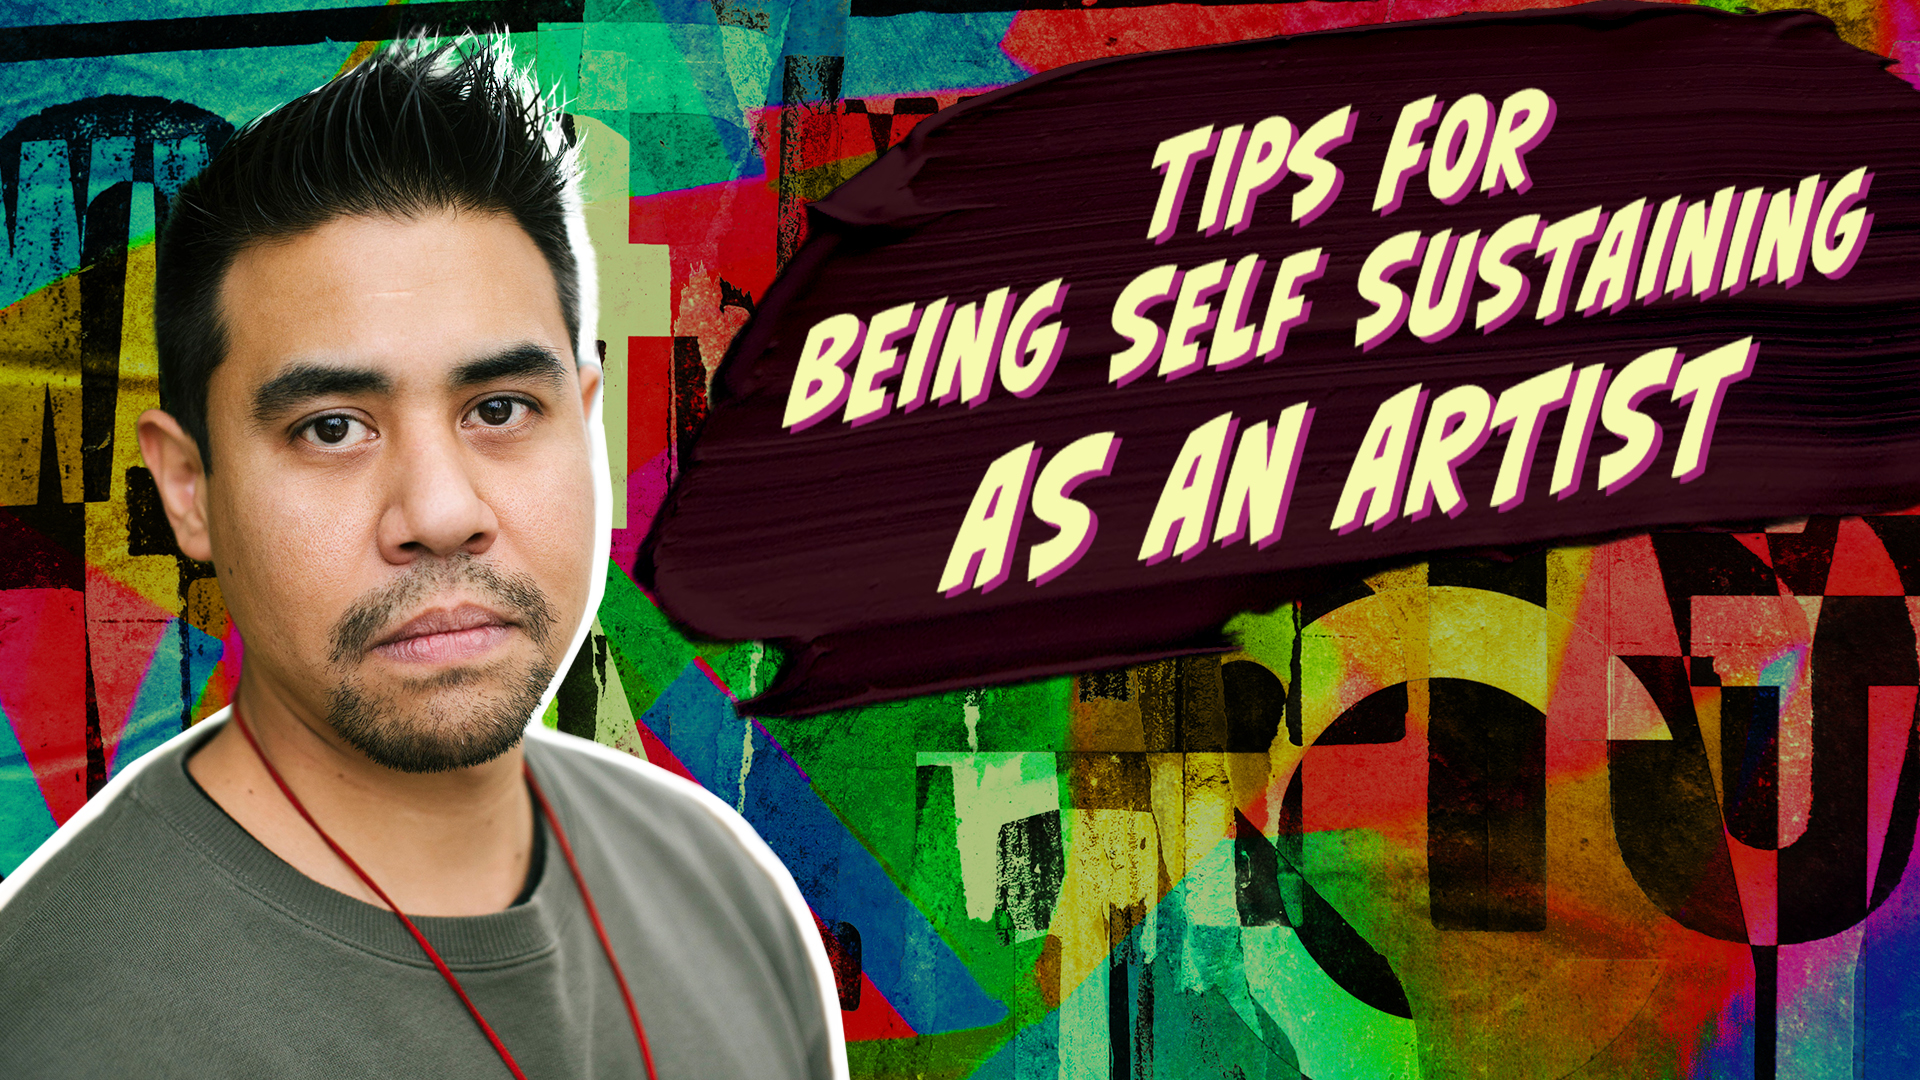 Tips for Being Self Sustaining as an Artist